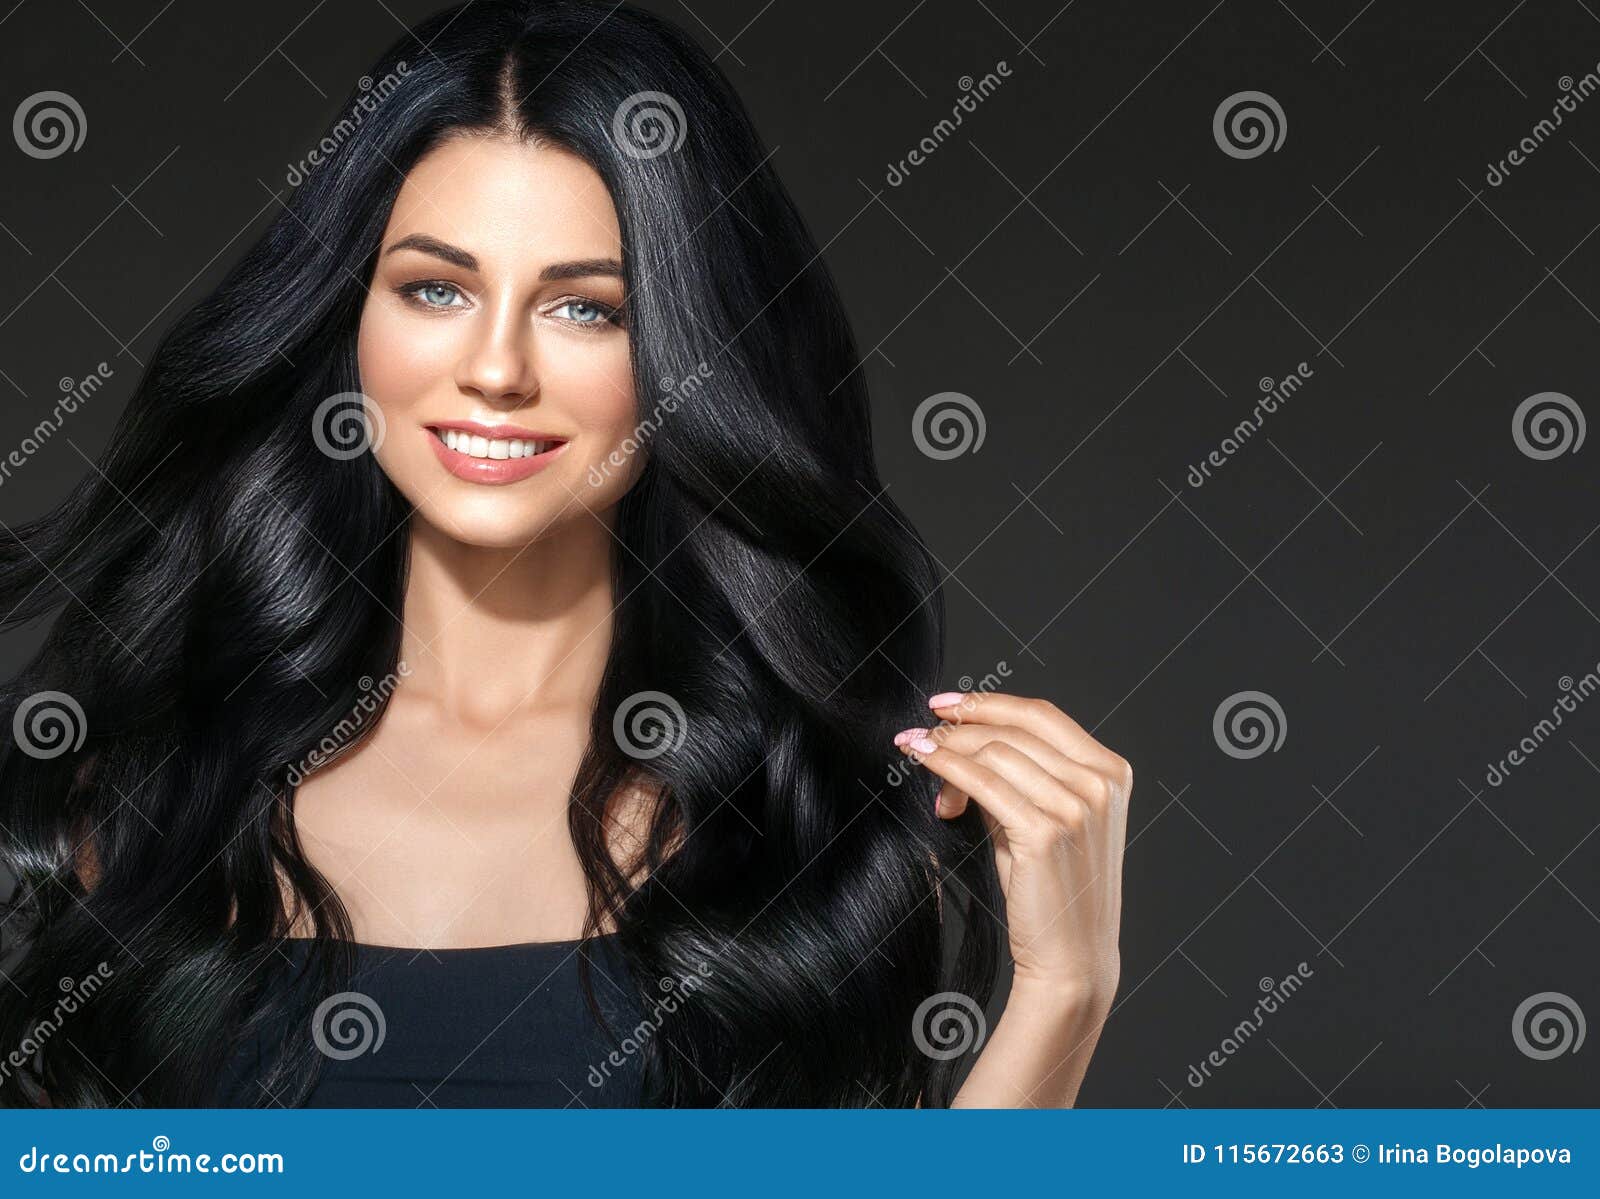 Black Hair Beauty Woman Beautiful Portrait. Hairstyle Curly Hai Stock Image  - Image of model, curly: 115672663